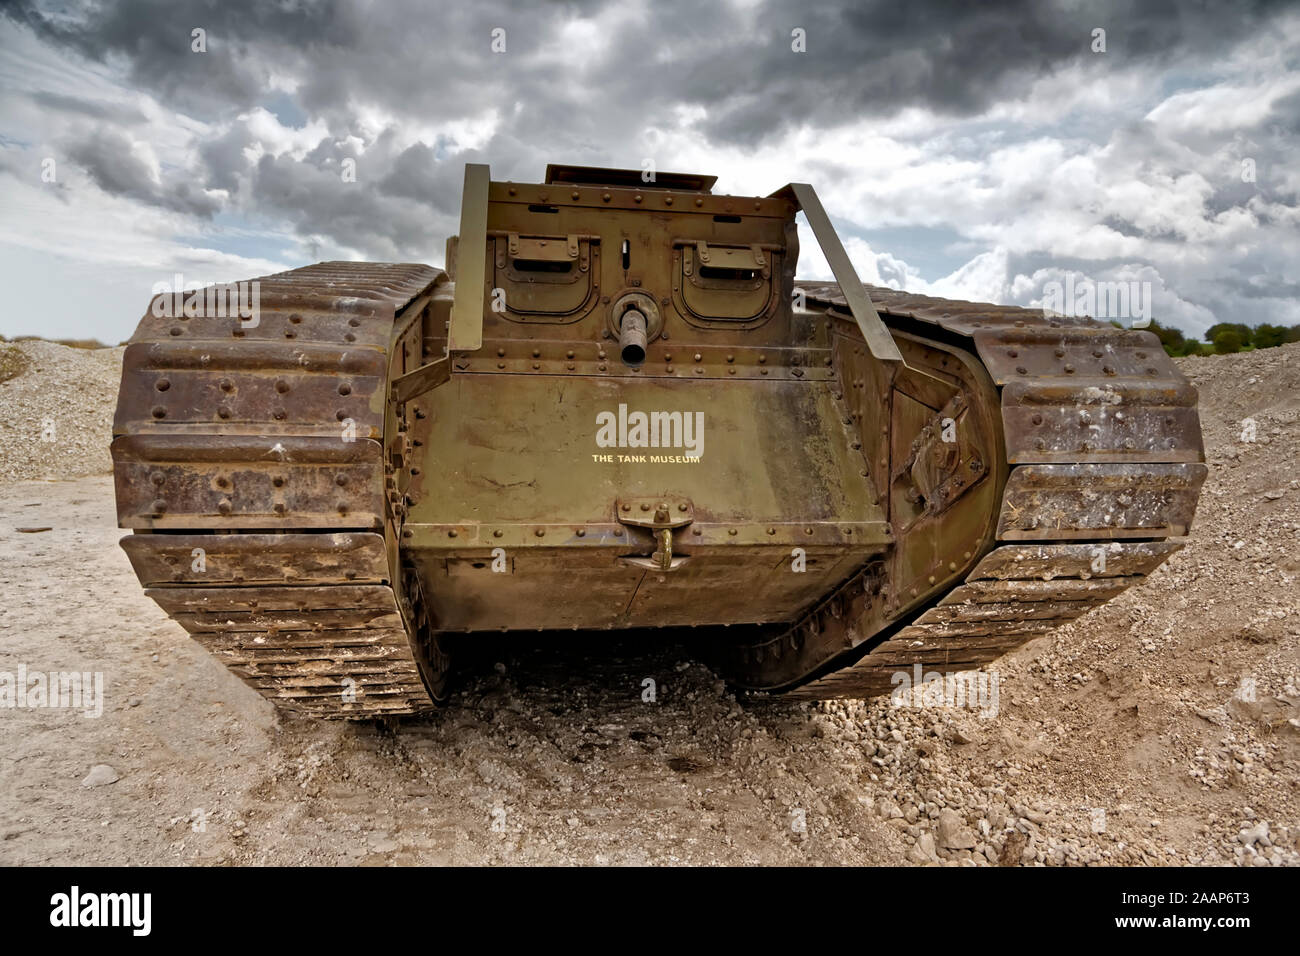 The Bovington Tank Museum's full size working replica of a WW1 British MK IV tank which featured in the 2011 film ' War Horse' pictured Stock Photo